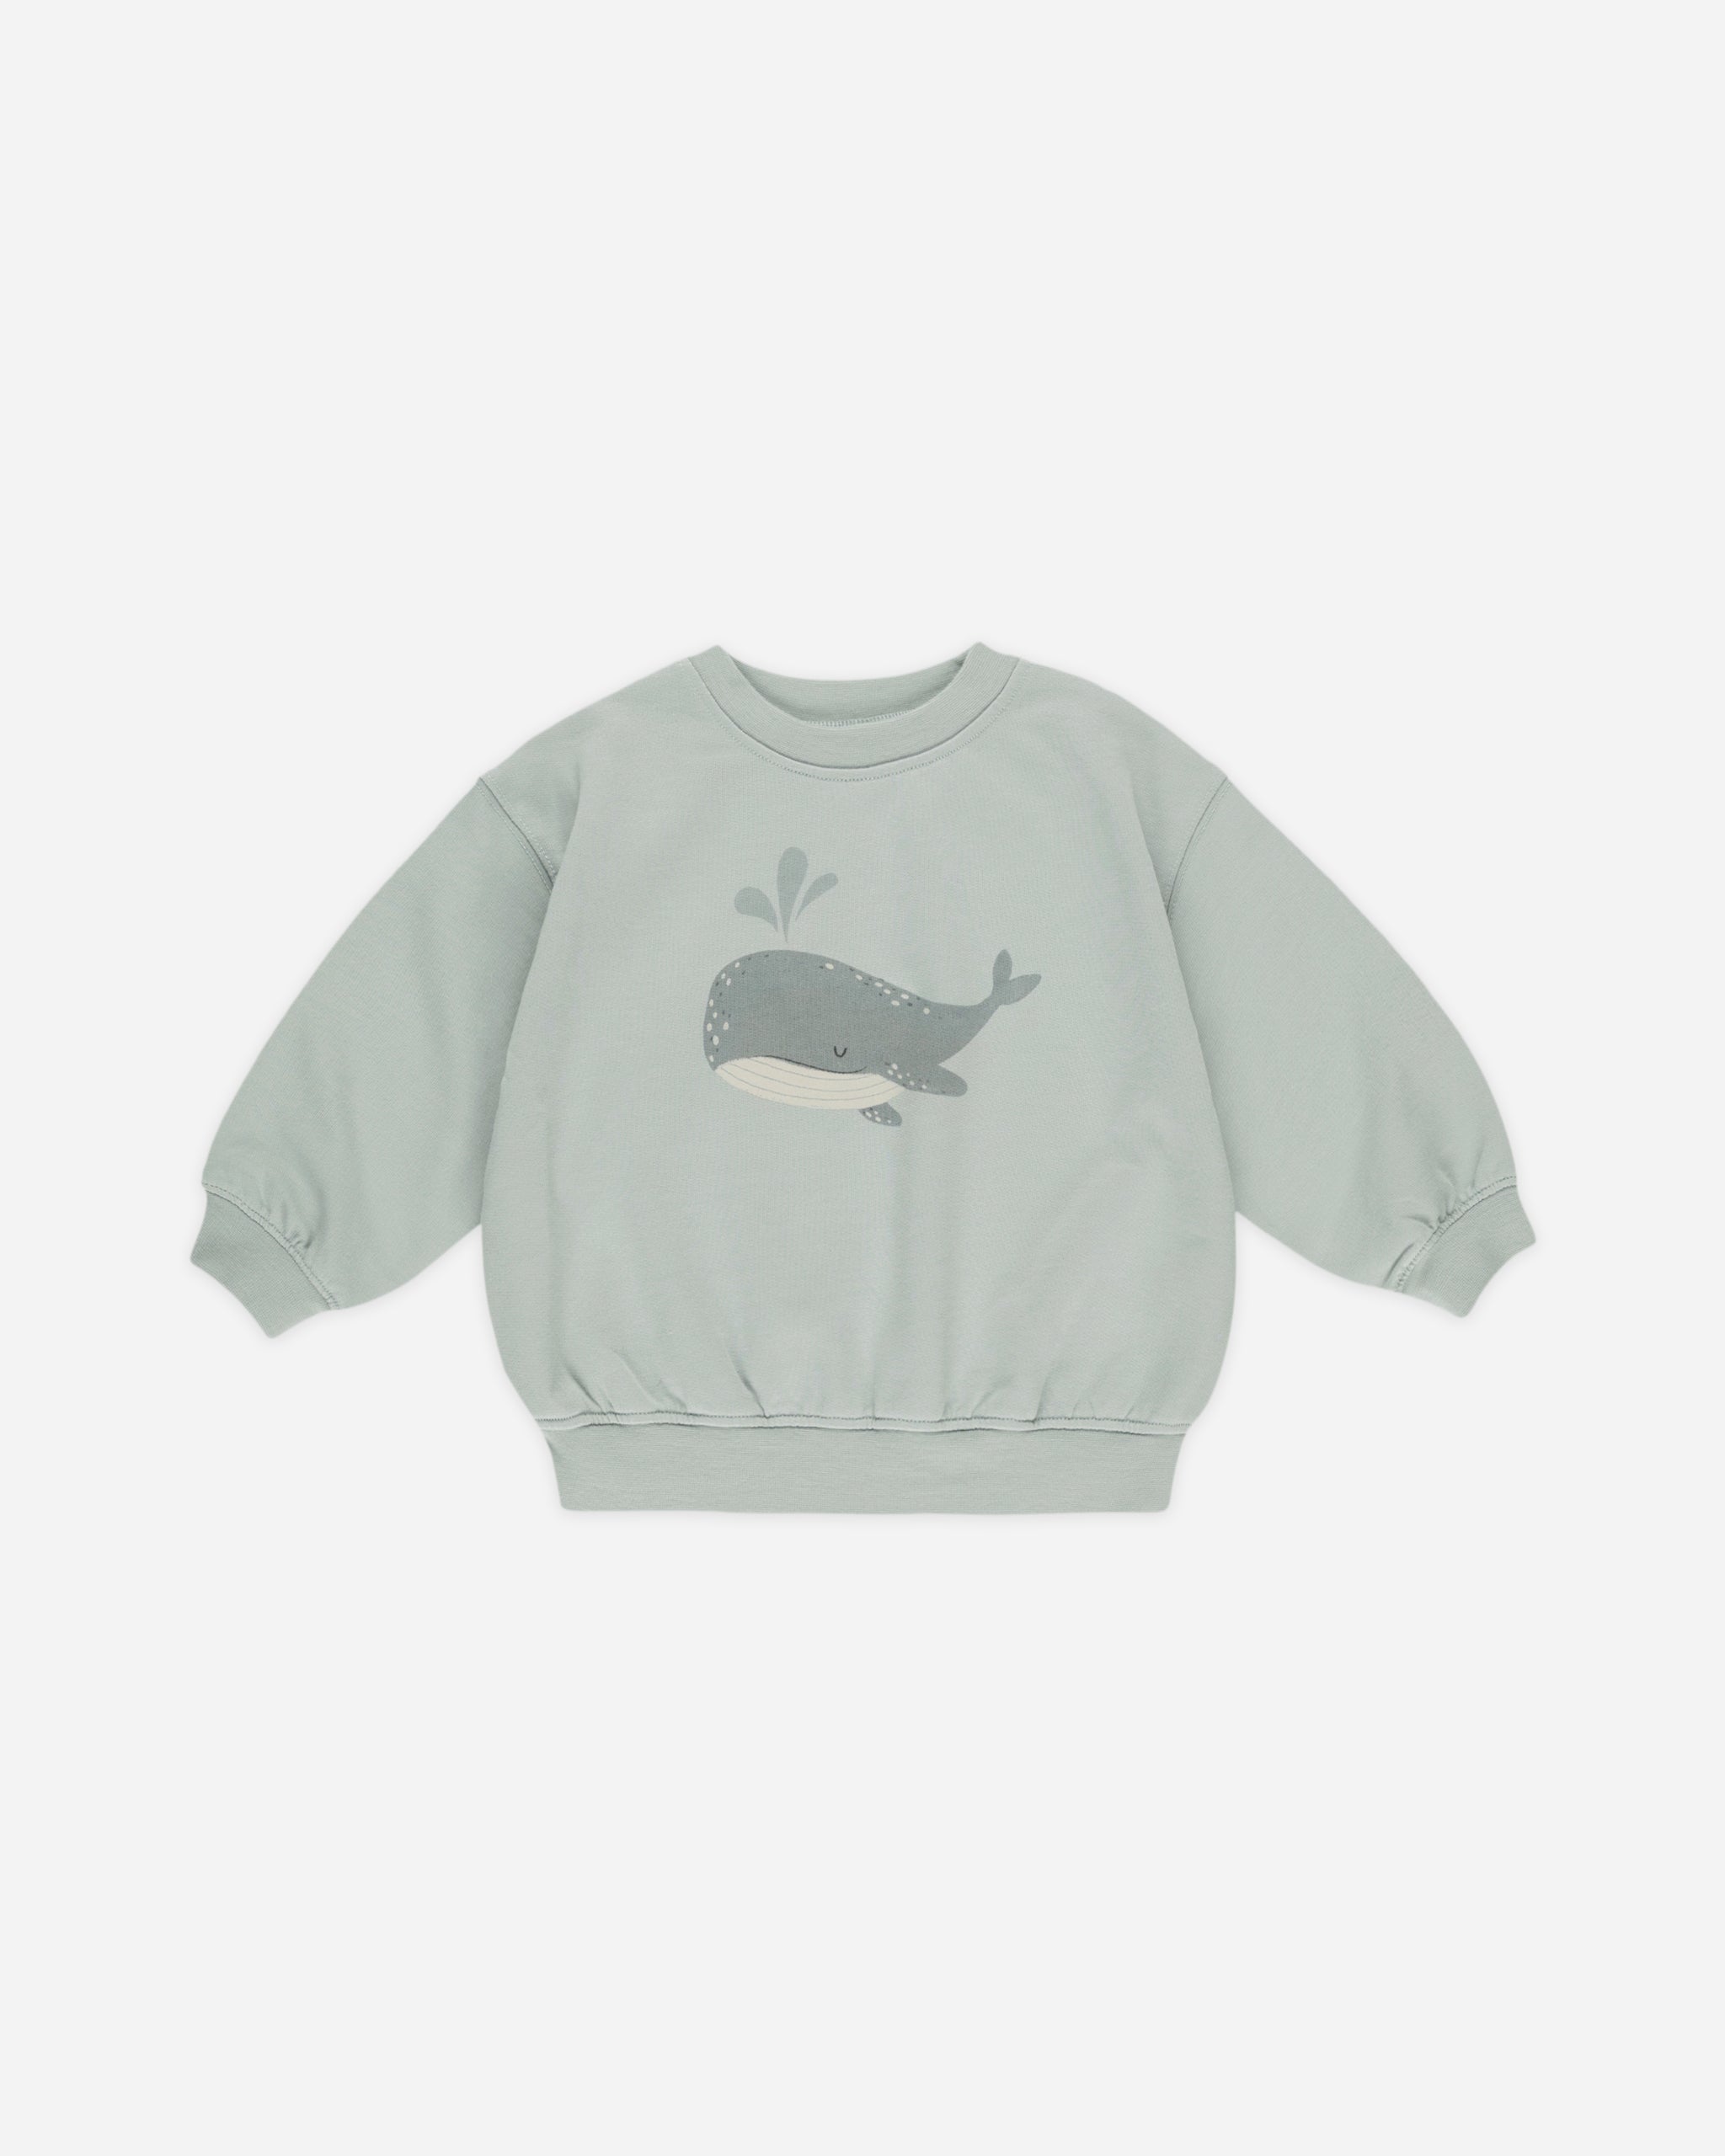 Sweatshirt || Whale - Rylee + Cru | Kids Clothes | Trendy Baby Clothes | Modern Infant Outfits |